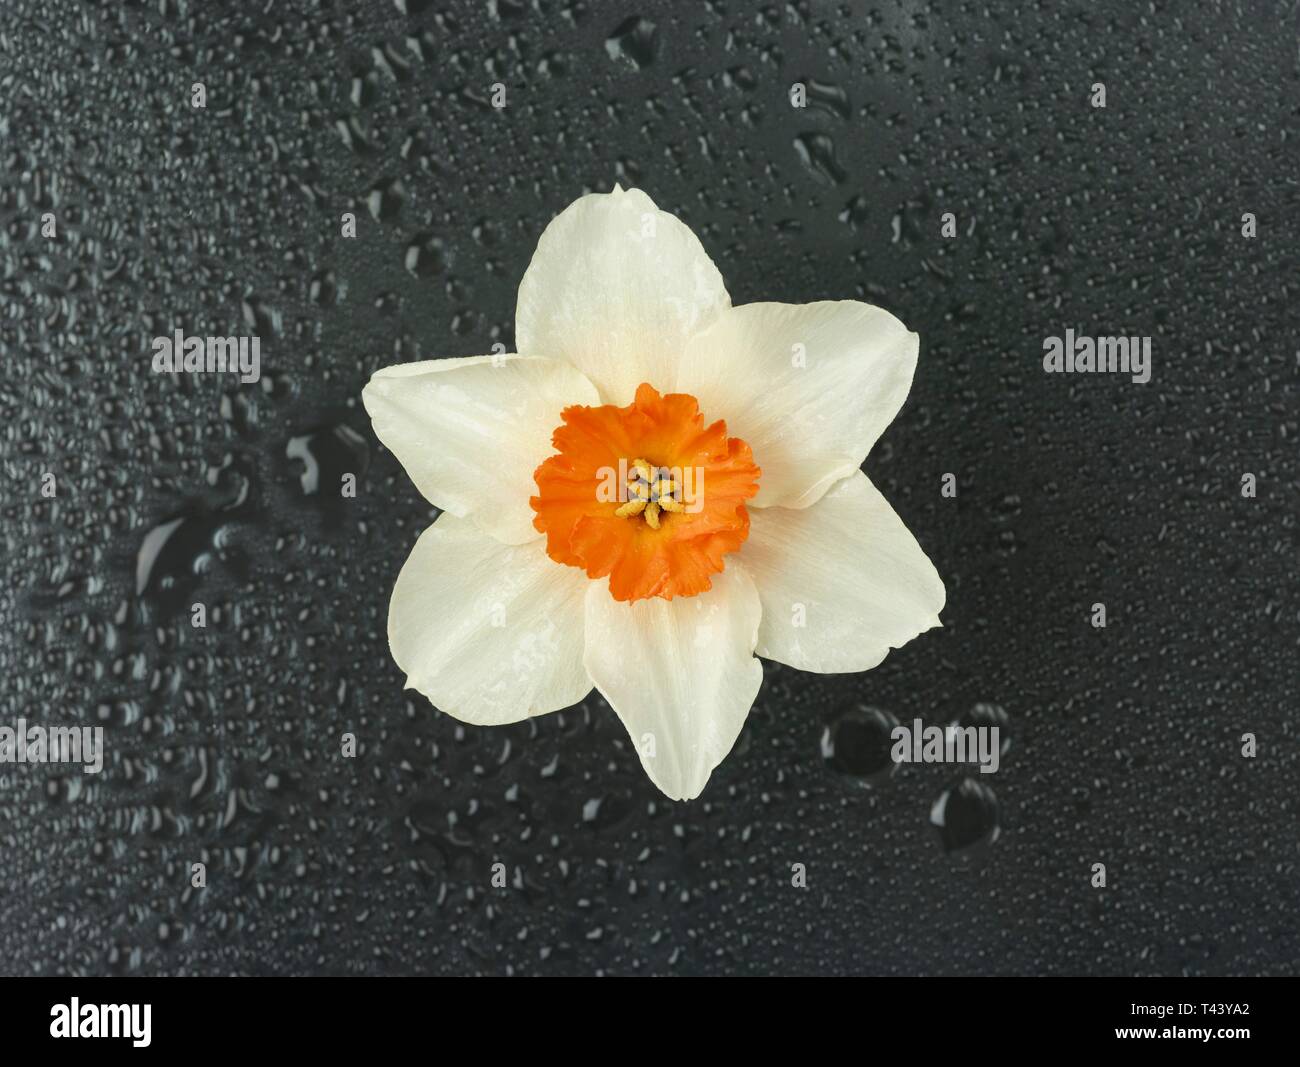 Daffodil spring flower nature portrait with dew background Stock Photo